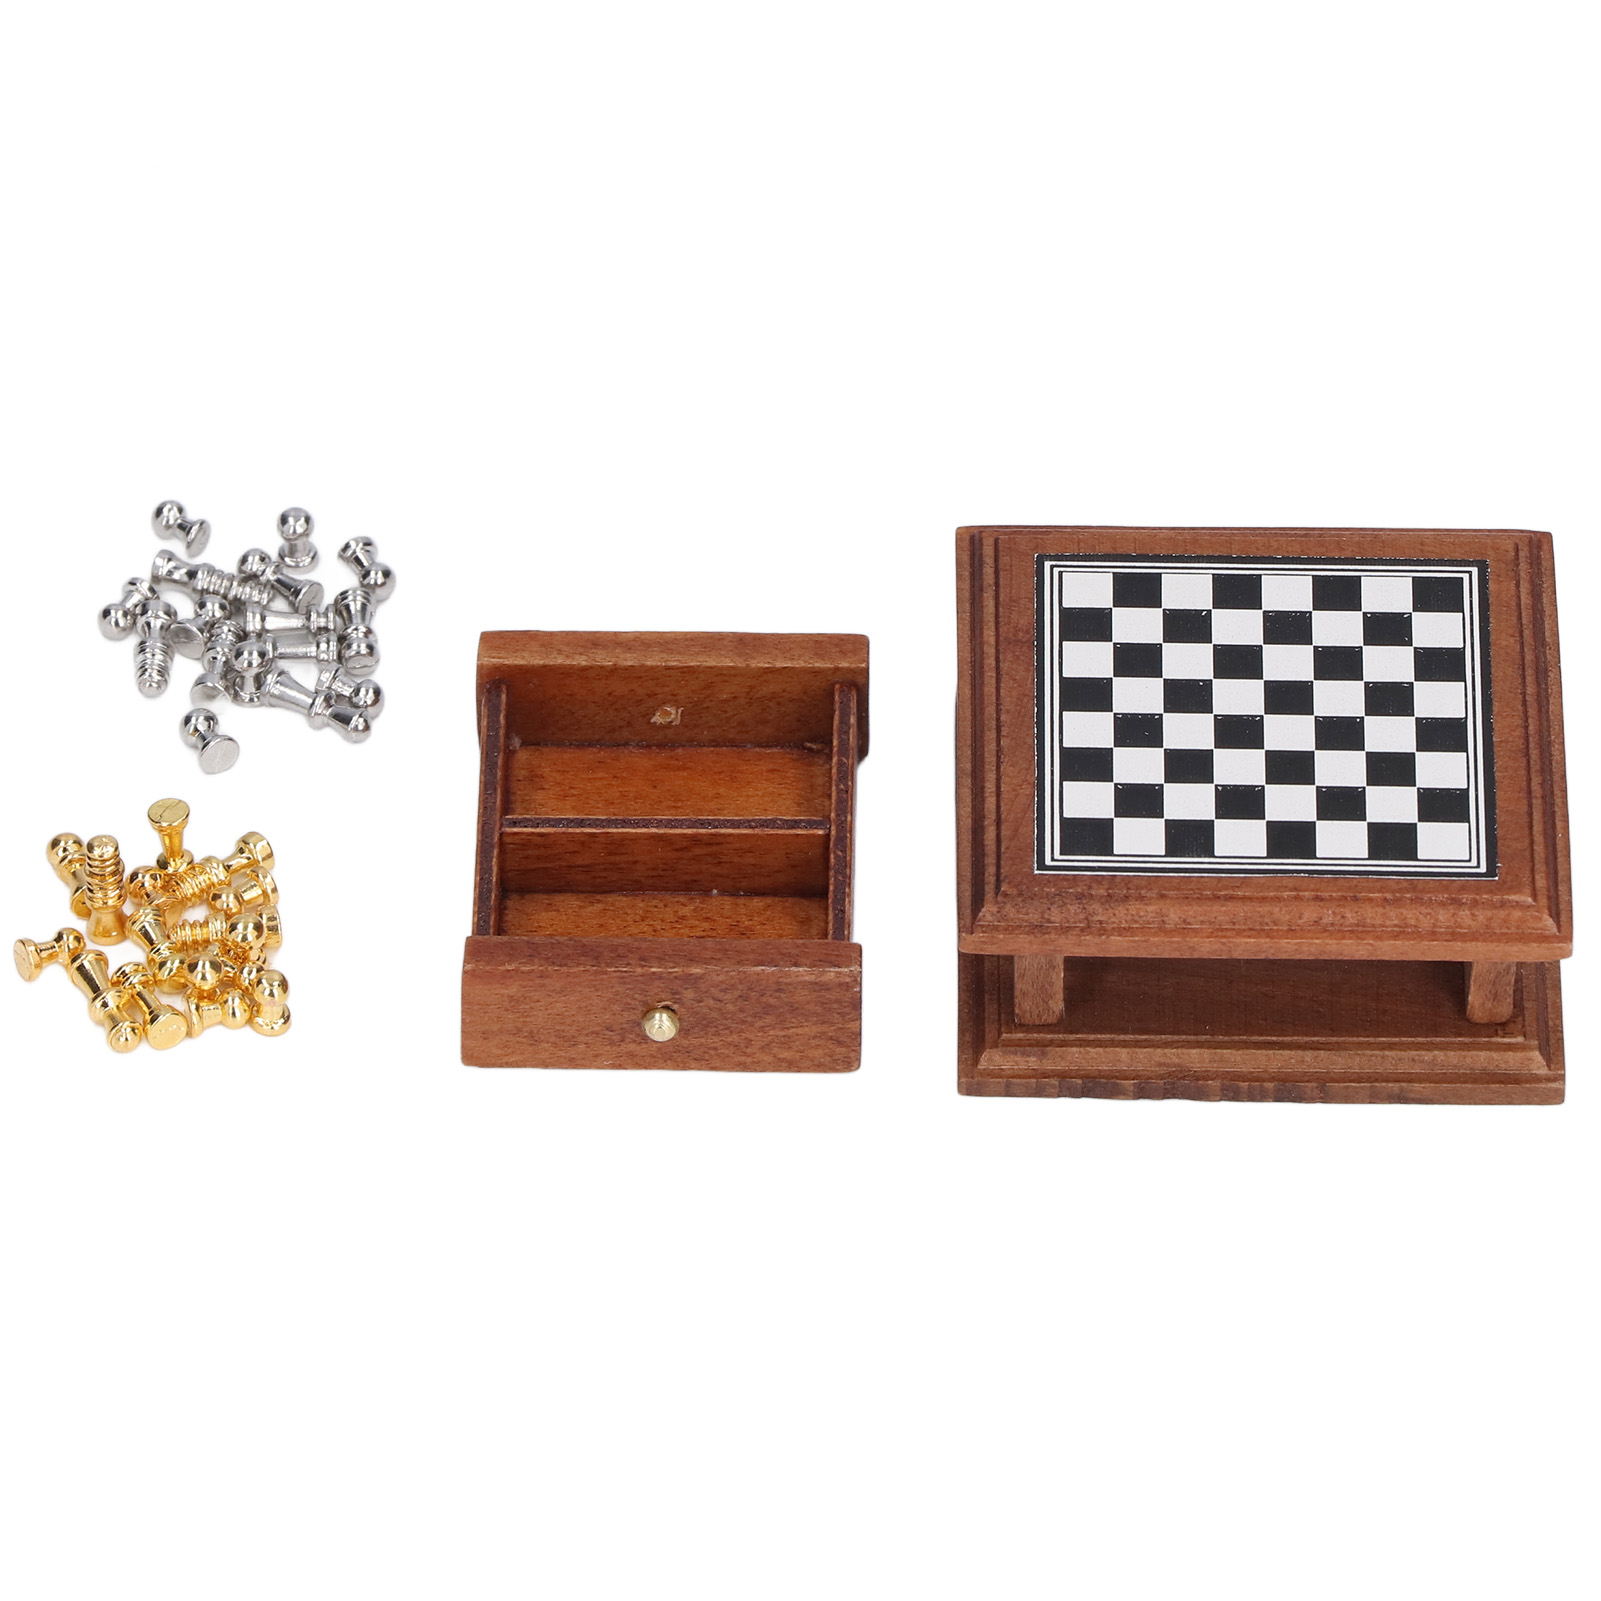 Ymiko Miniature Chess Set 1:12 Doll House Exquisite Mini Chess Set Home Decoration Gift,Chess Table Set,Chess Board Set - image 1 of 8